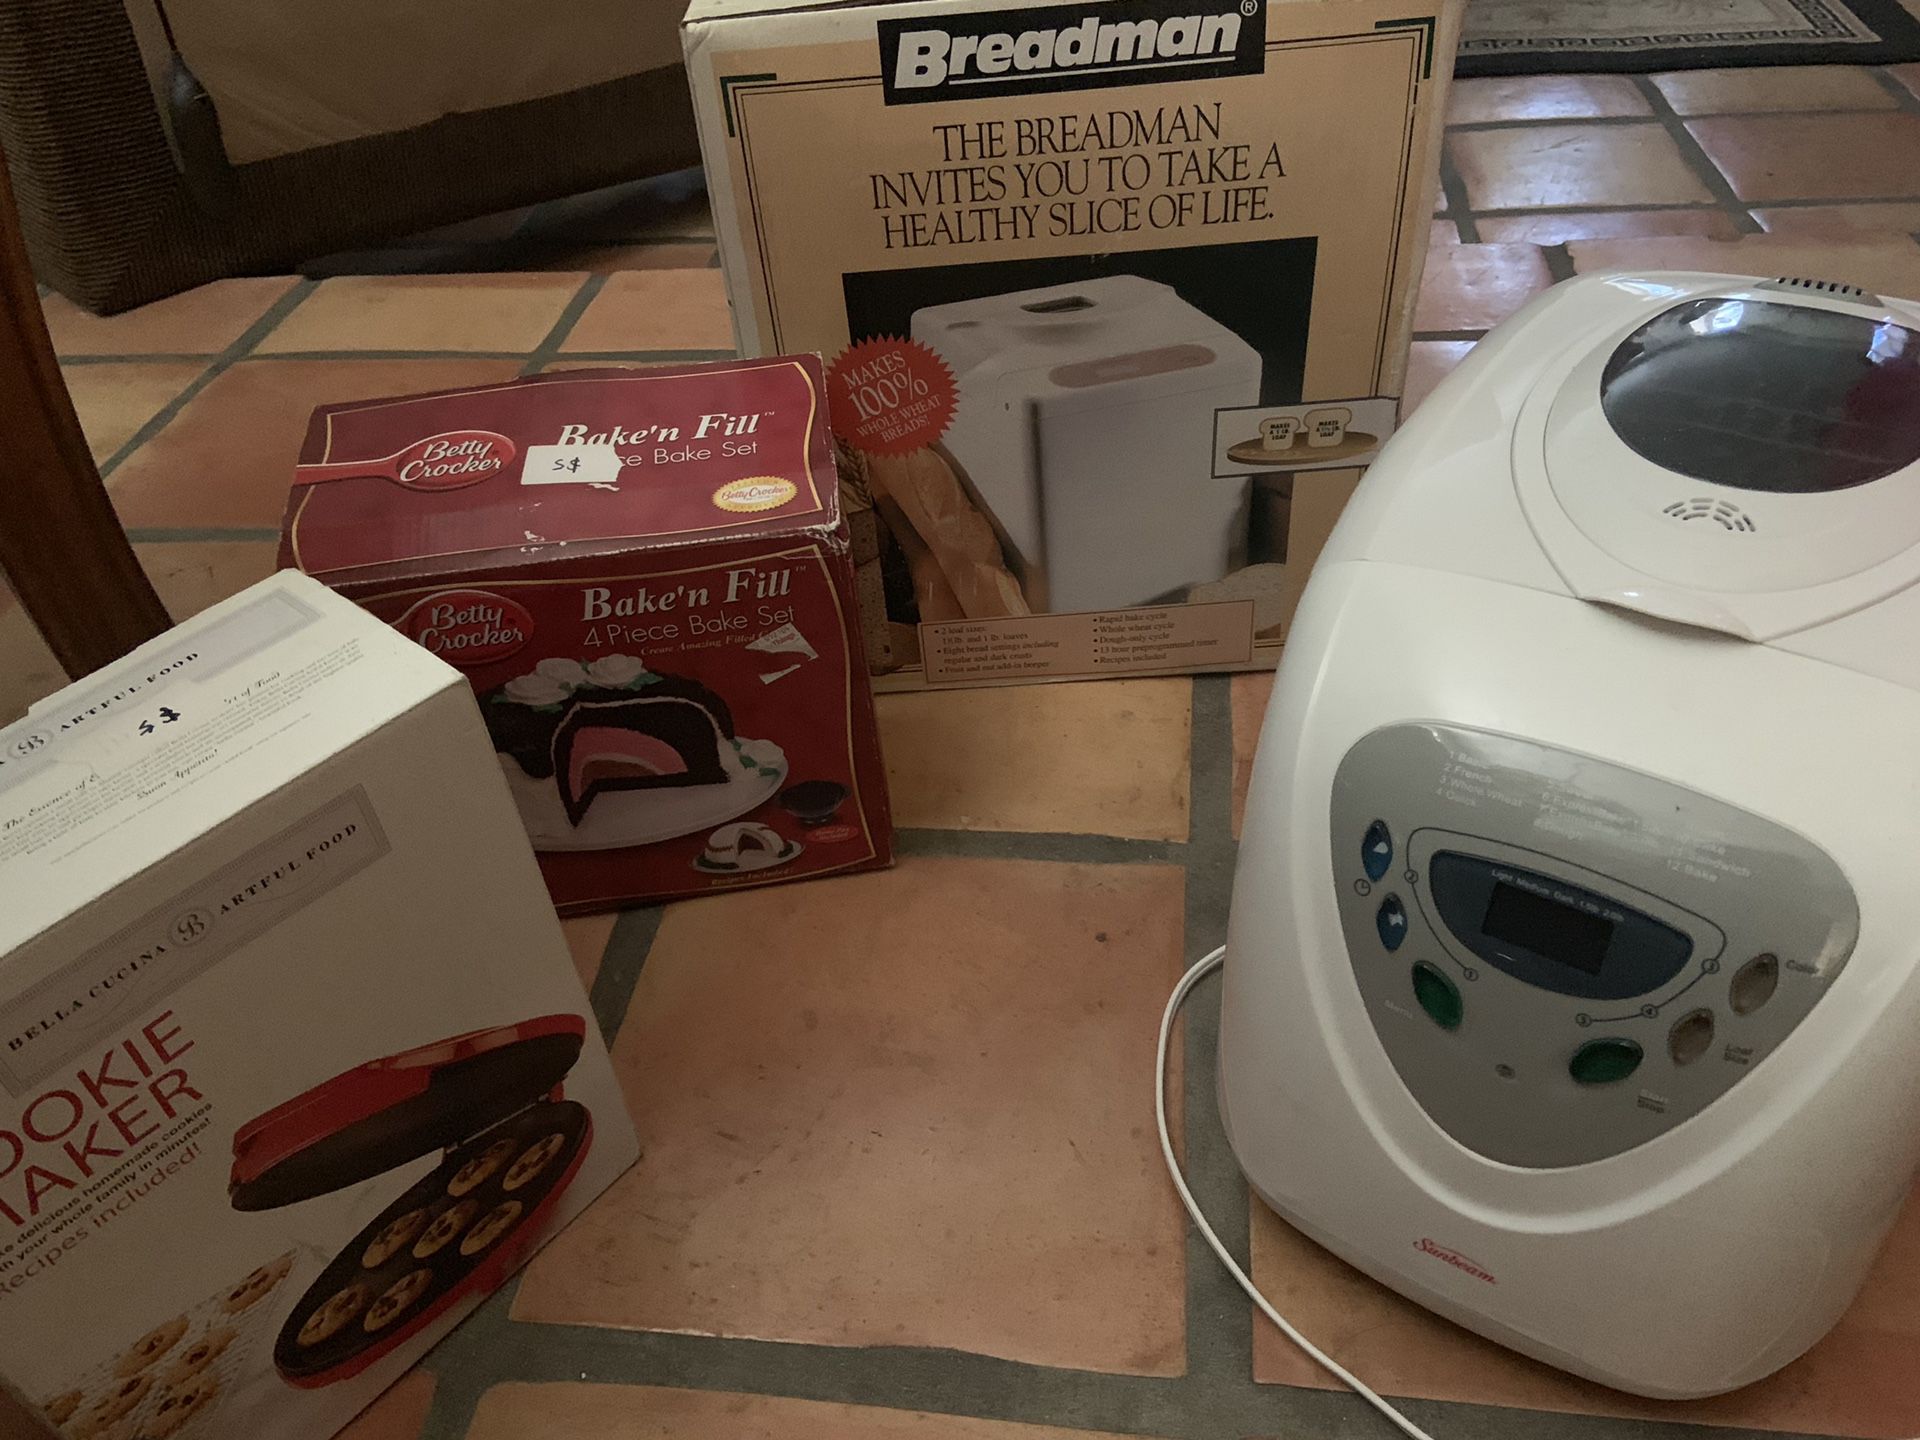 Two bread makers, baked fill, cookie baker -all for 50